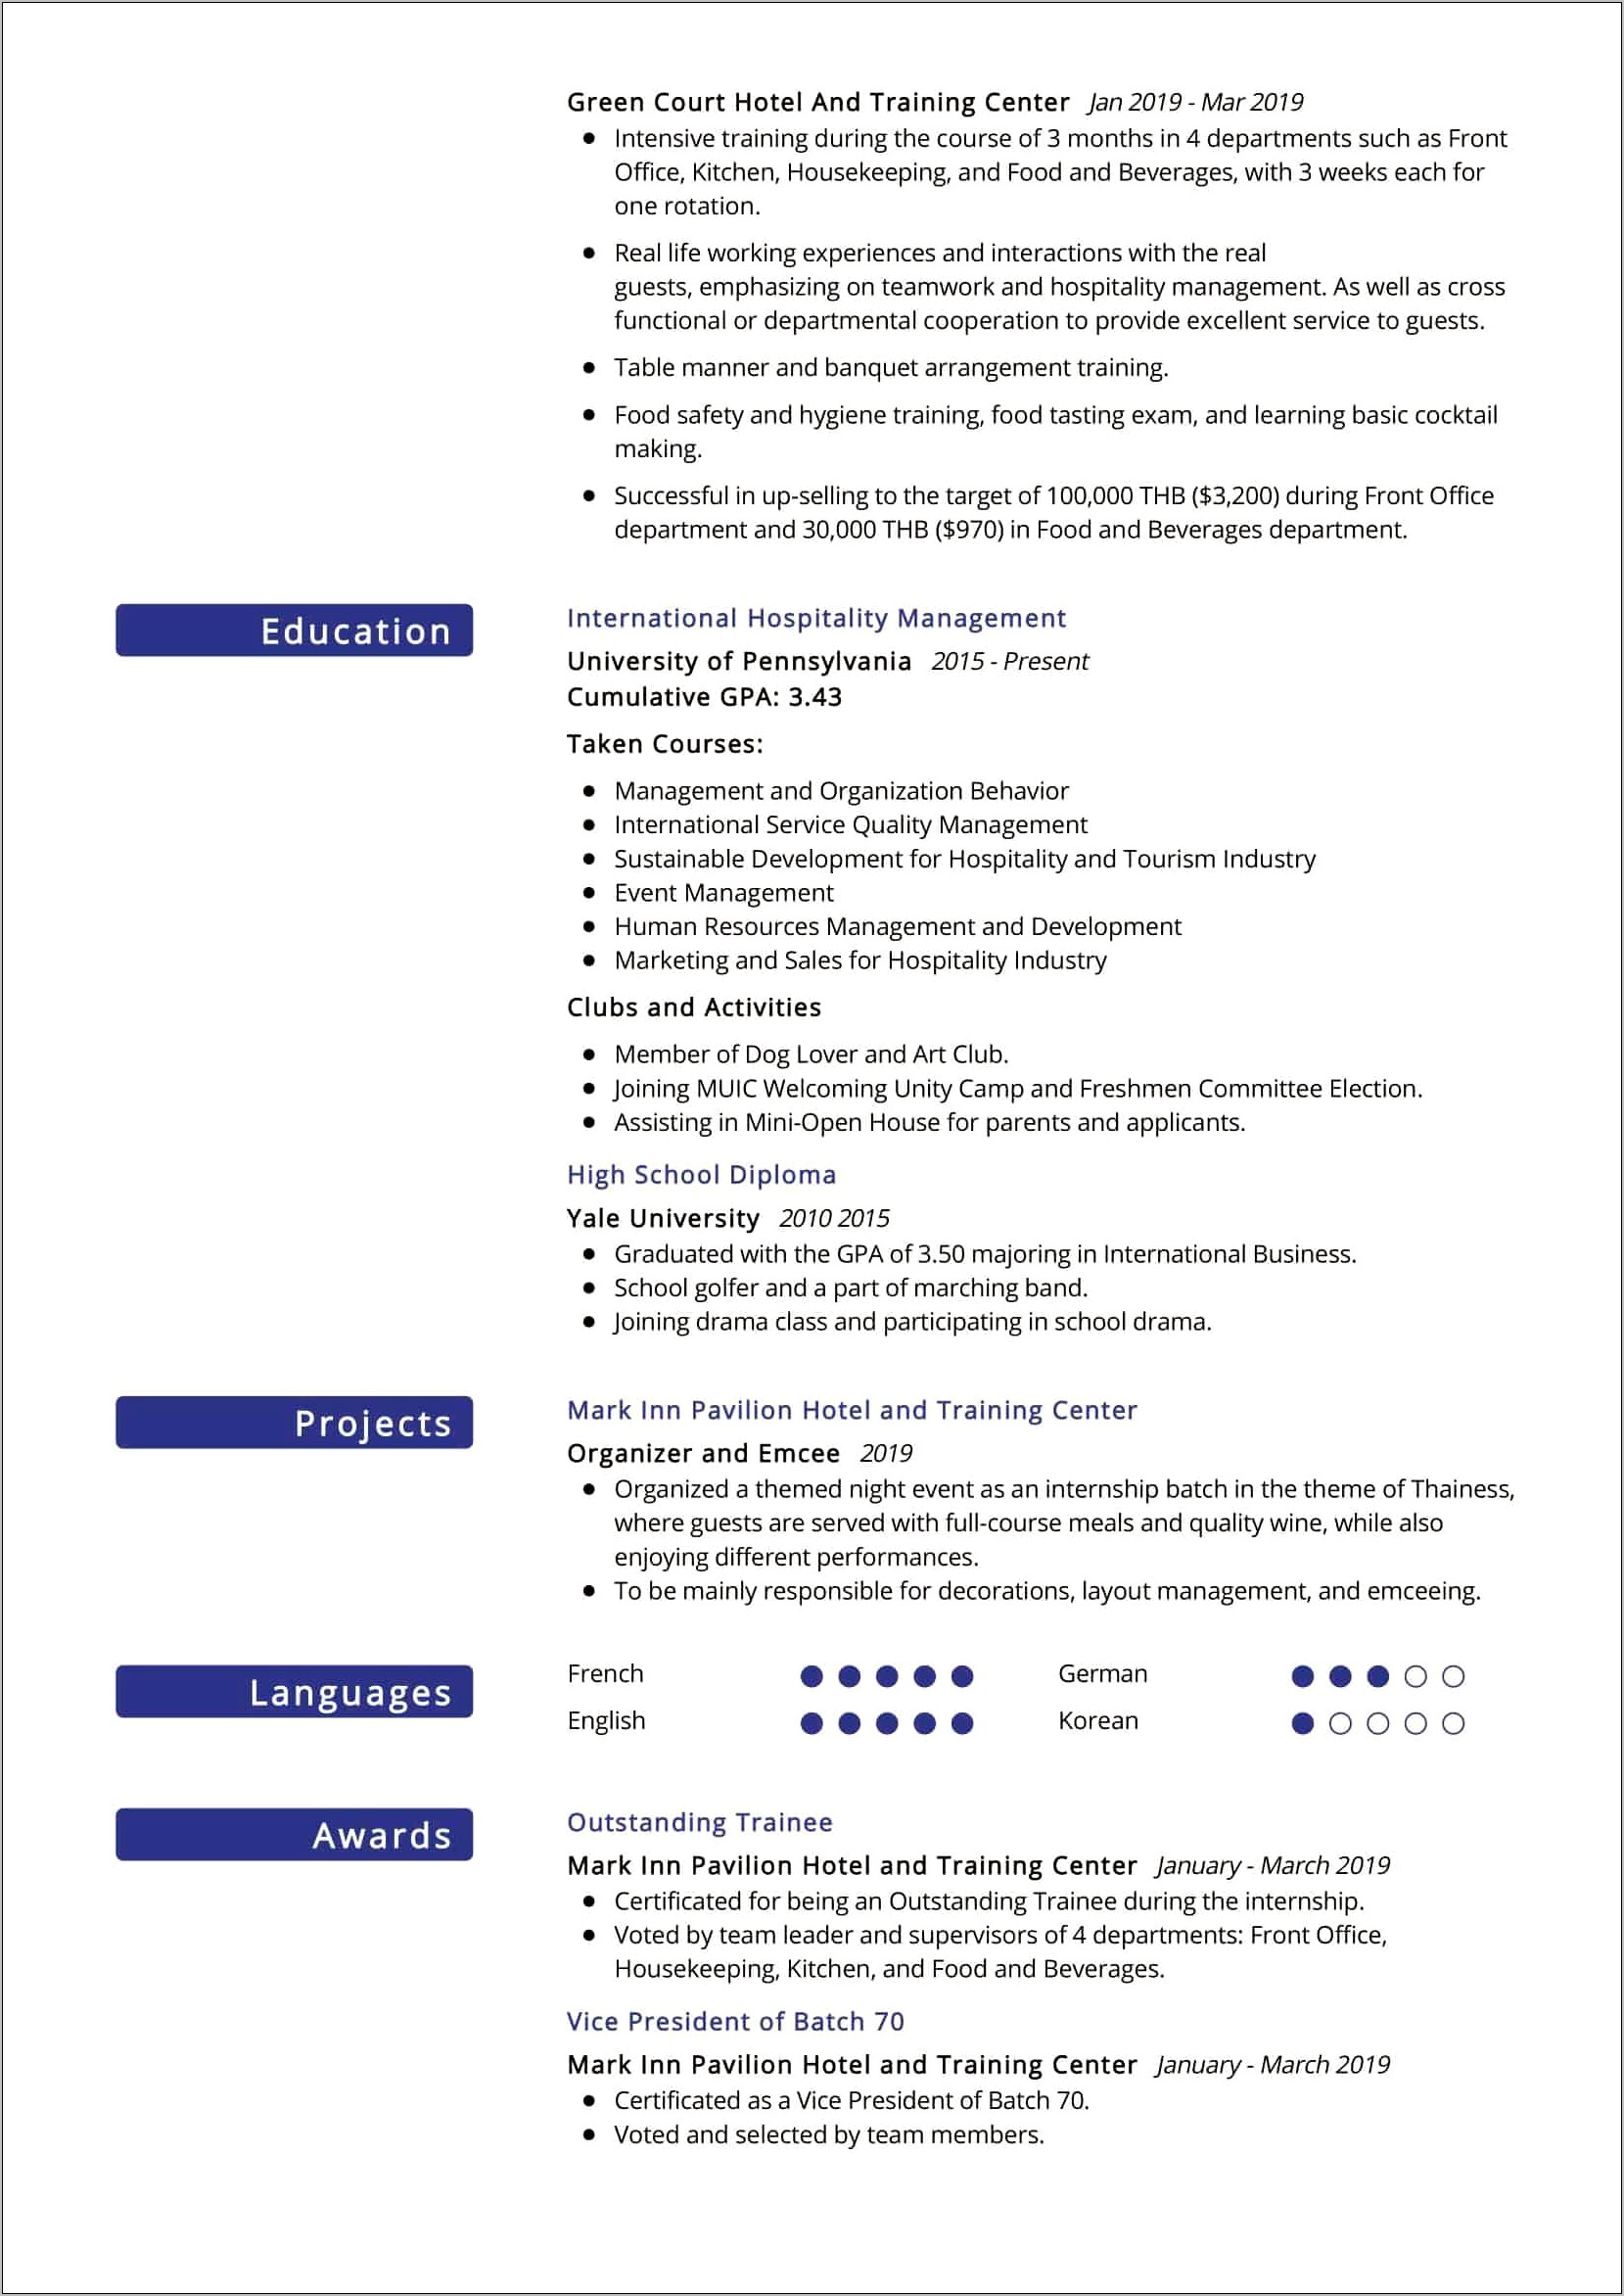 Quality Food Analyst Manager Resume